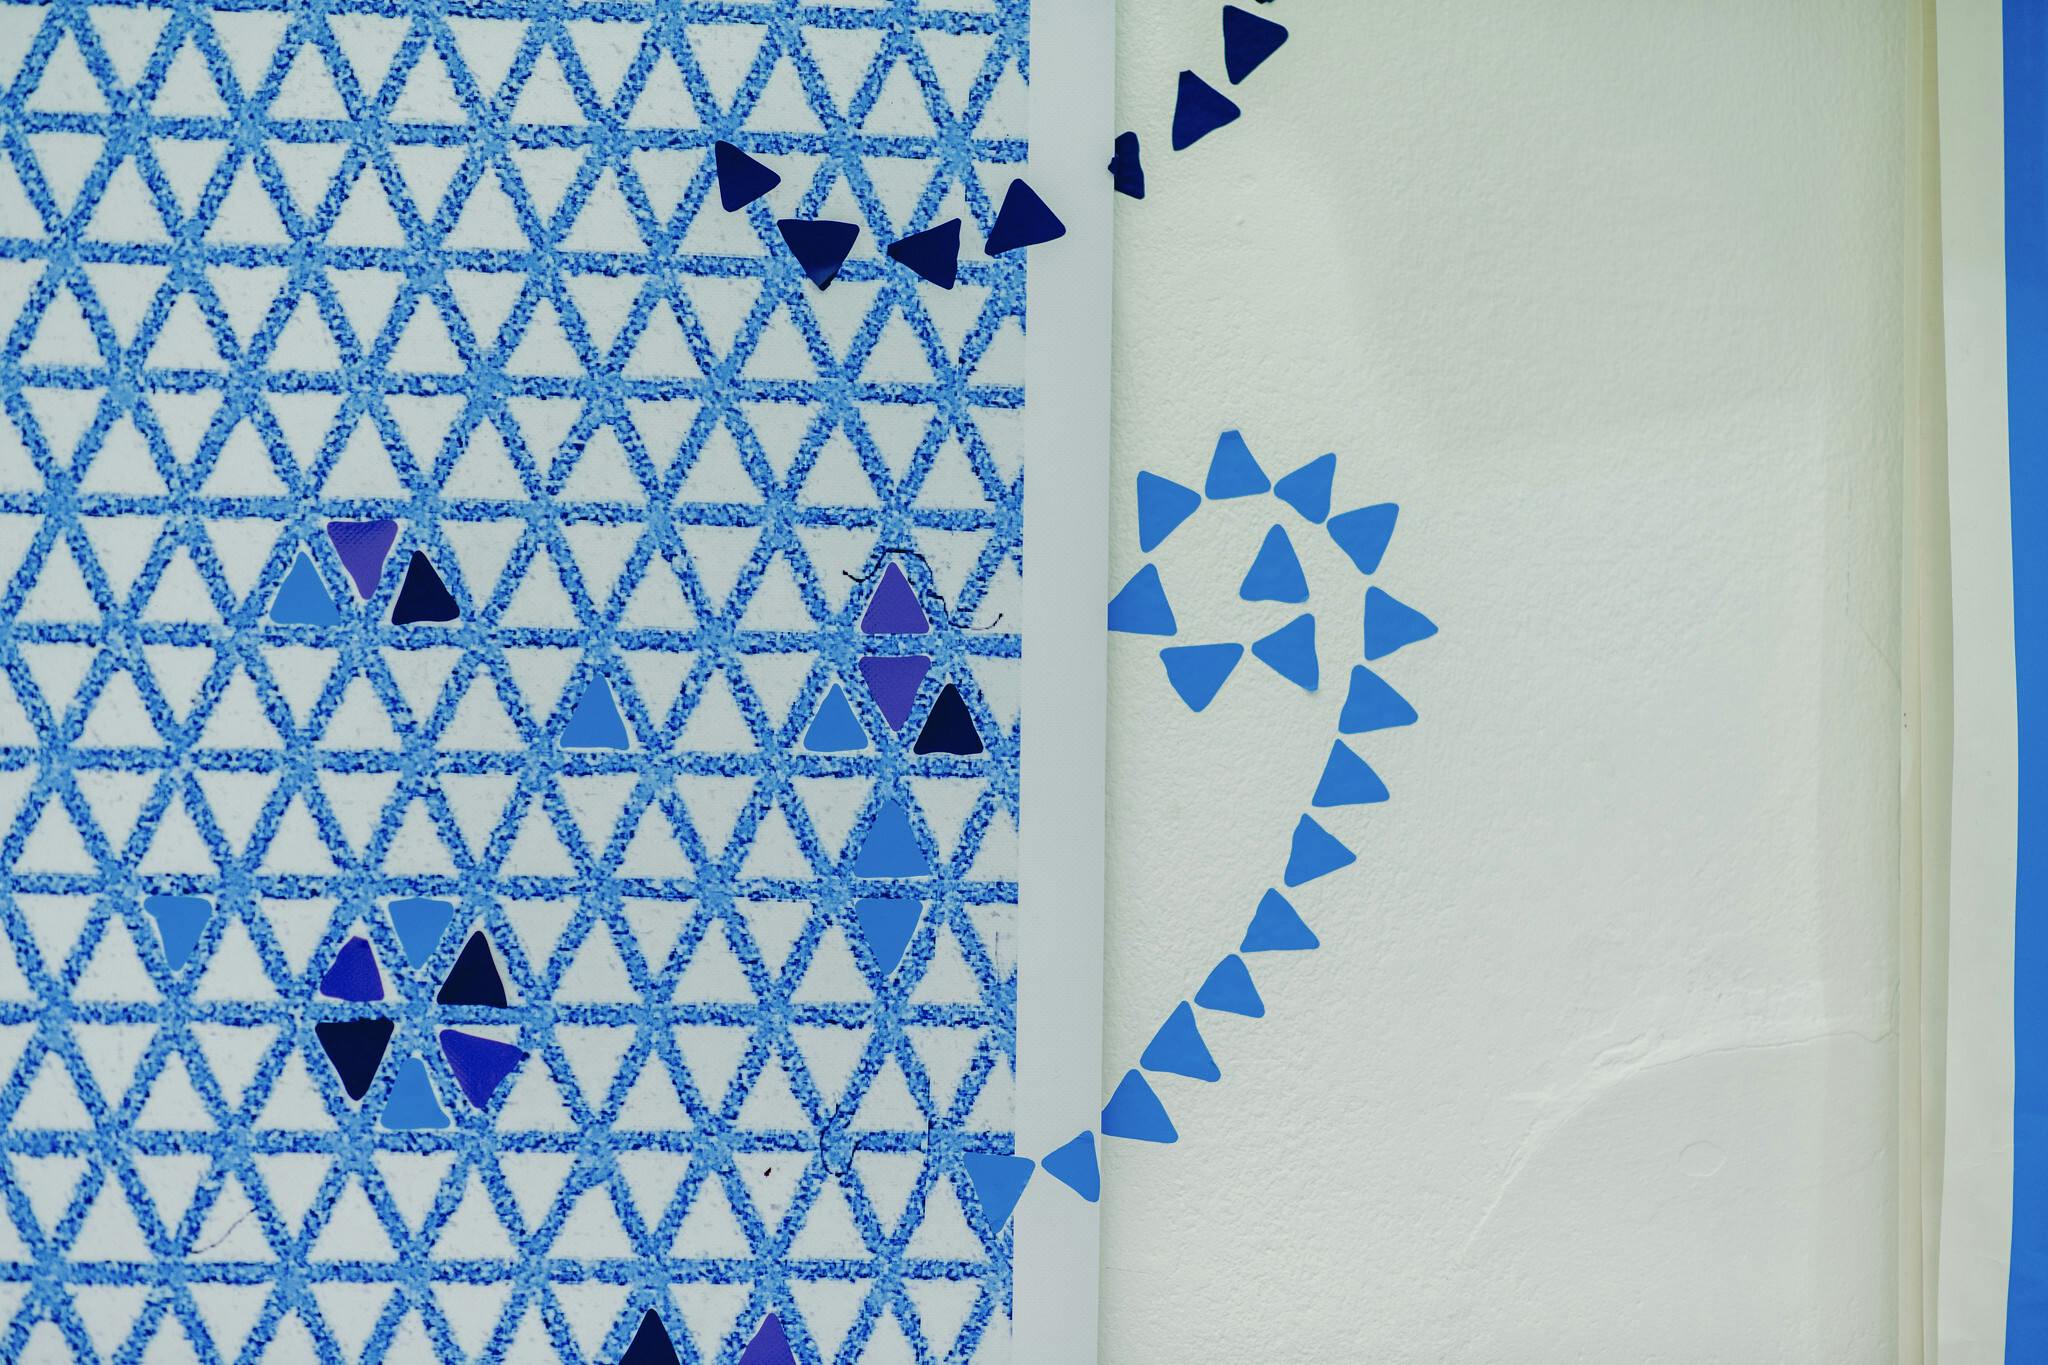 Art work by Tracey Harrison Goldsmith, textured blue triangles adorn a large sheet of paper, some are filled in with the colours black, blue or purple. A spiral of triangles cross from the paper onto the wall.